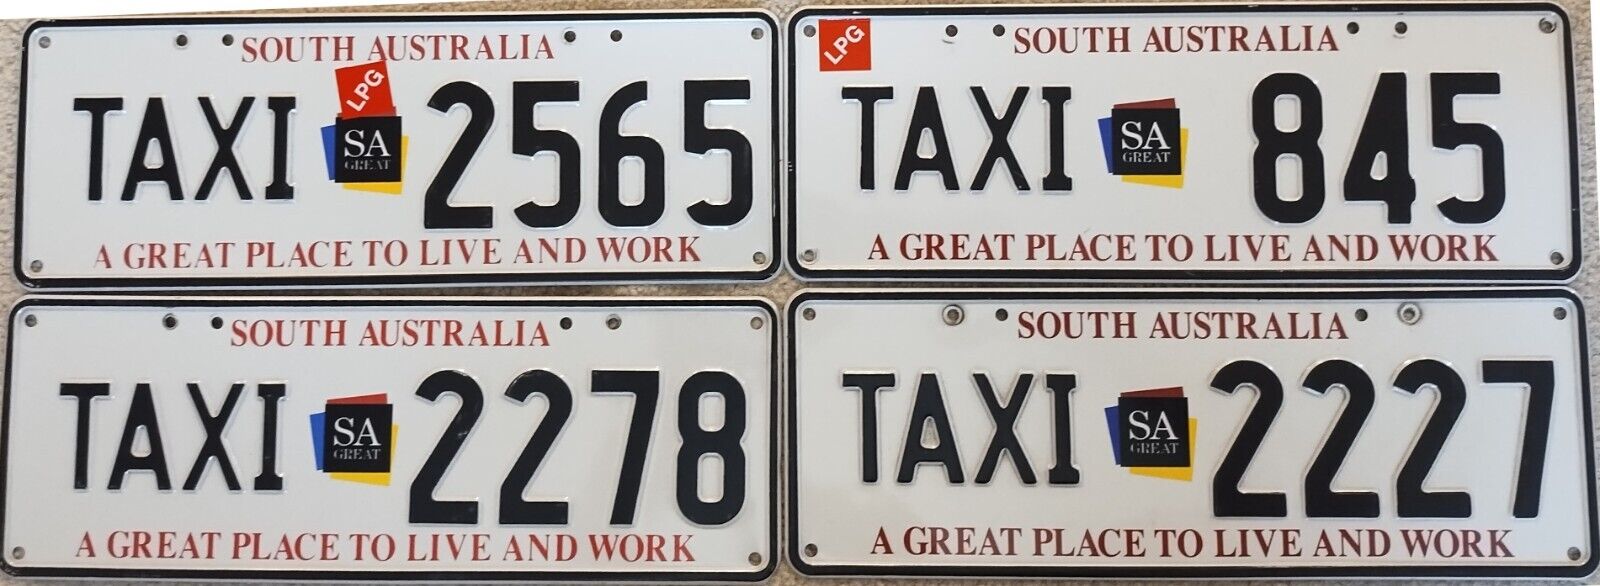 South Australia SA - Taxi License Plate - Great Place to Live and Work